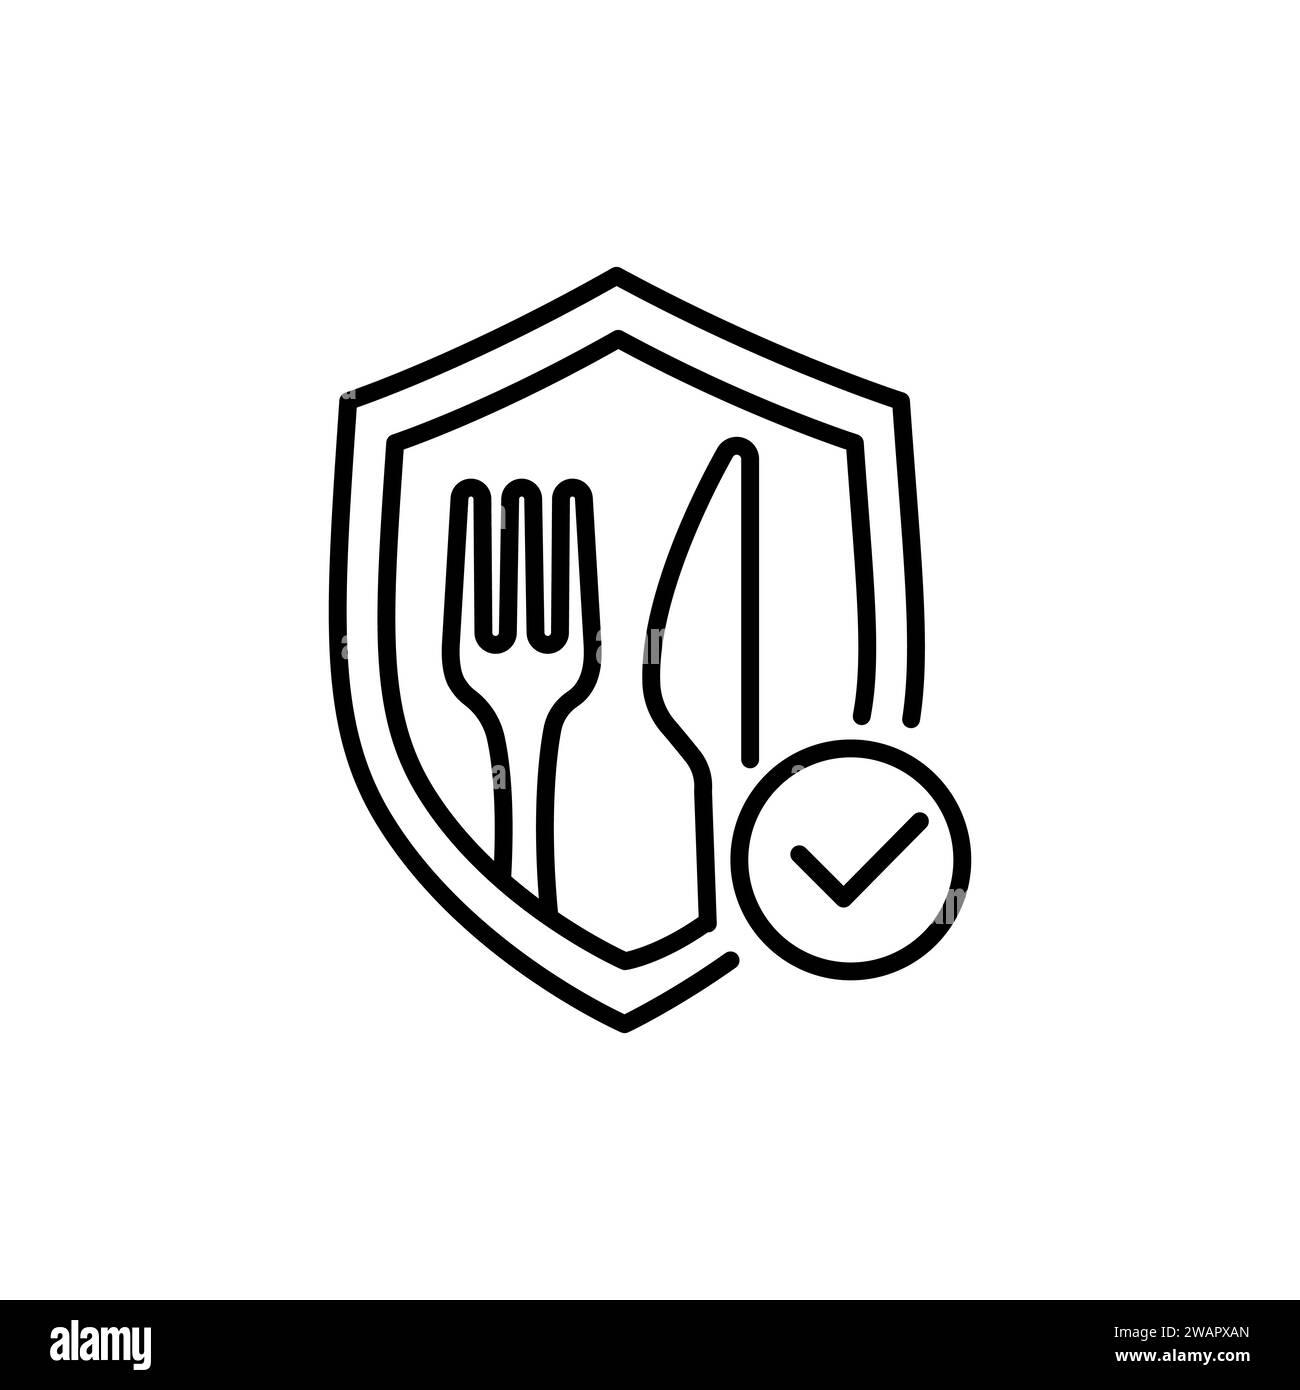 Ecological pure product icon, food safety tested in laboratory, shield with fork and knife, editable stroke vector illustration Stock Vector